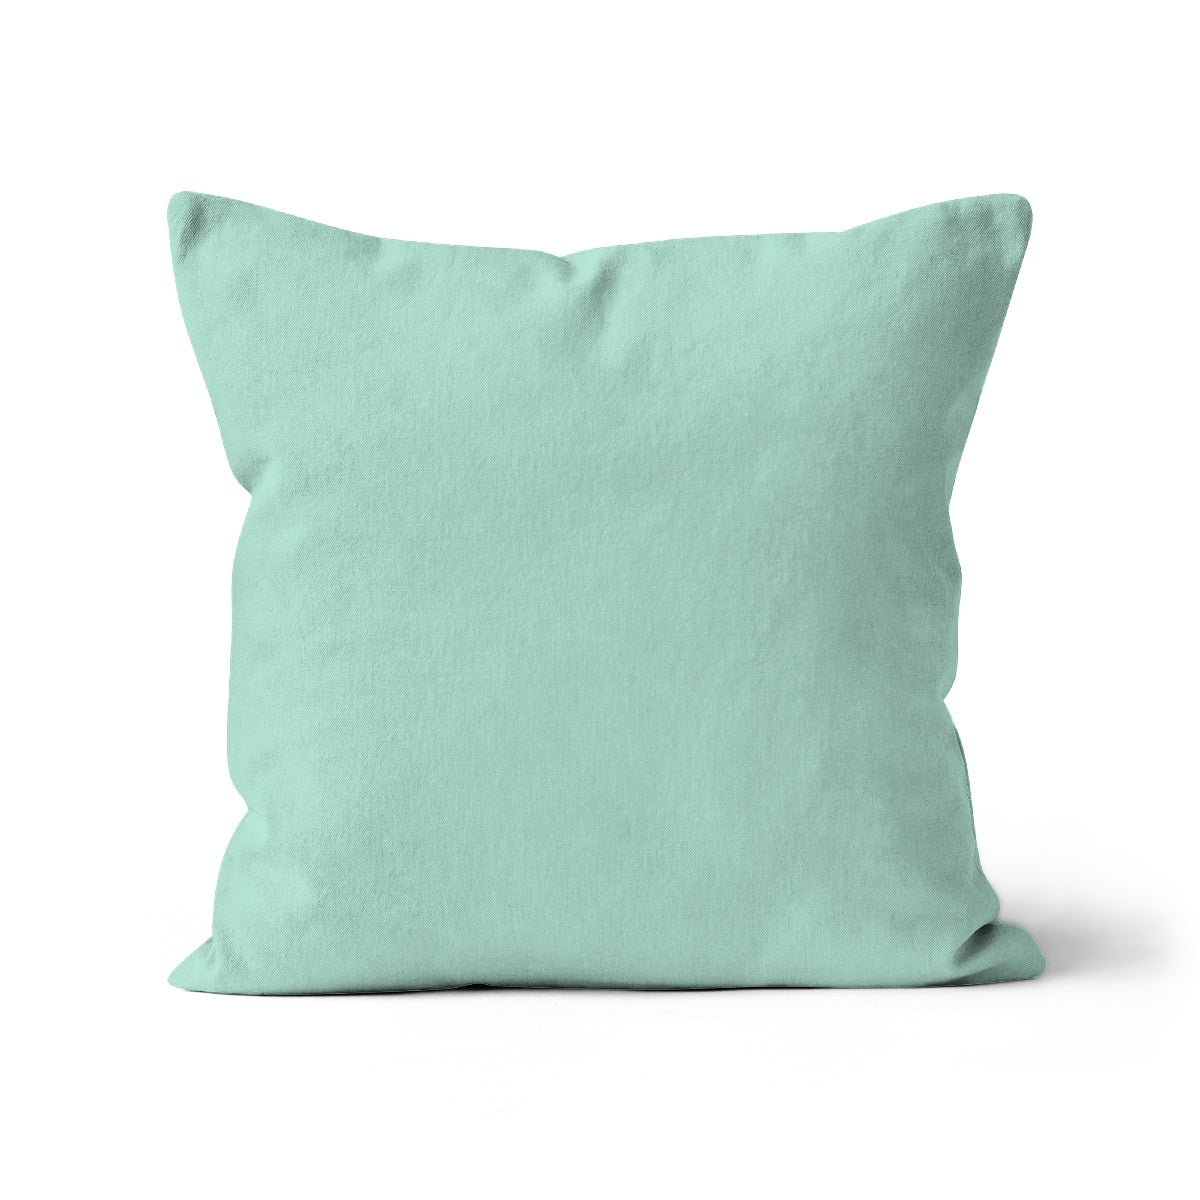 Mint green cotton cover, 100% organic fabric, sustainable and eco friendly. Square cushion cover. Removal with zip fastening.